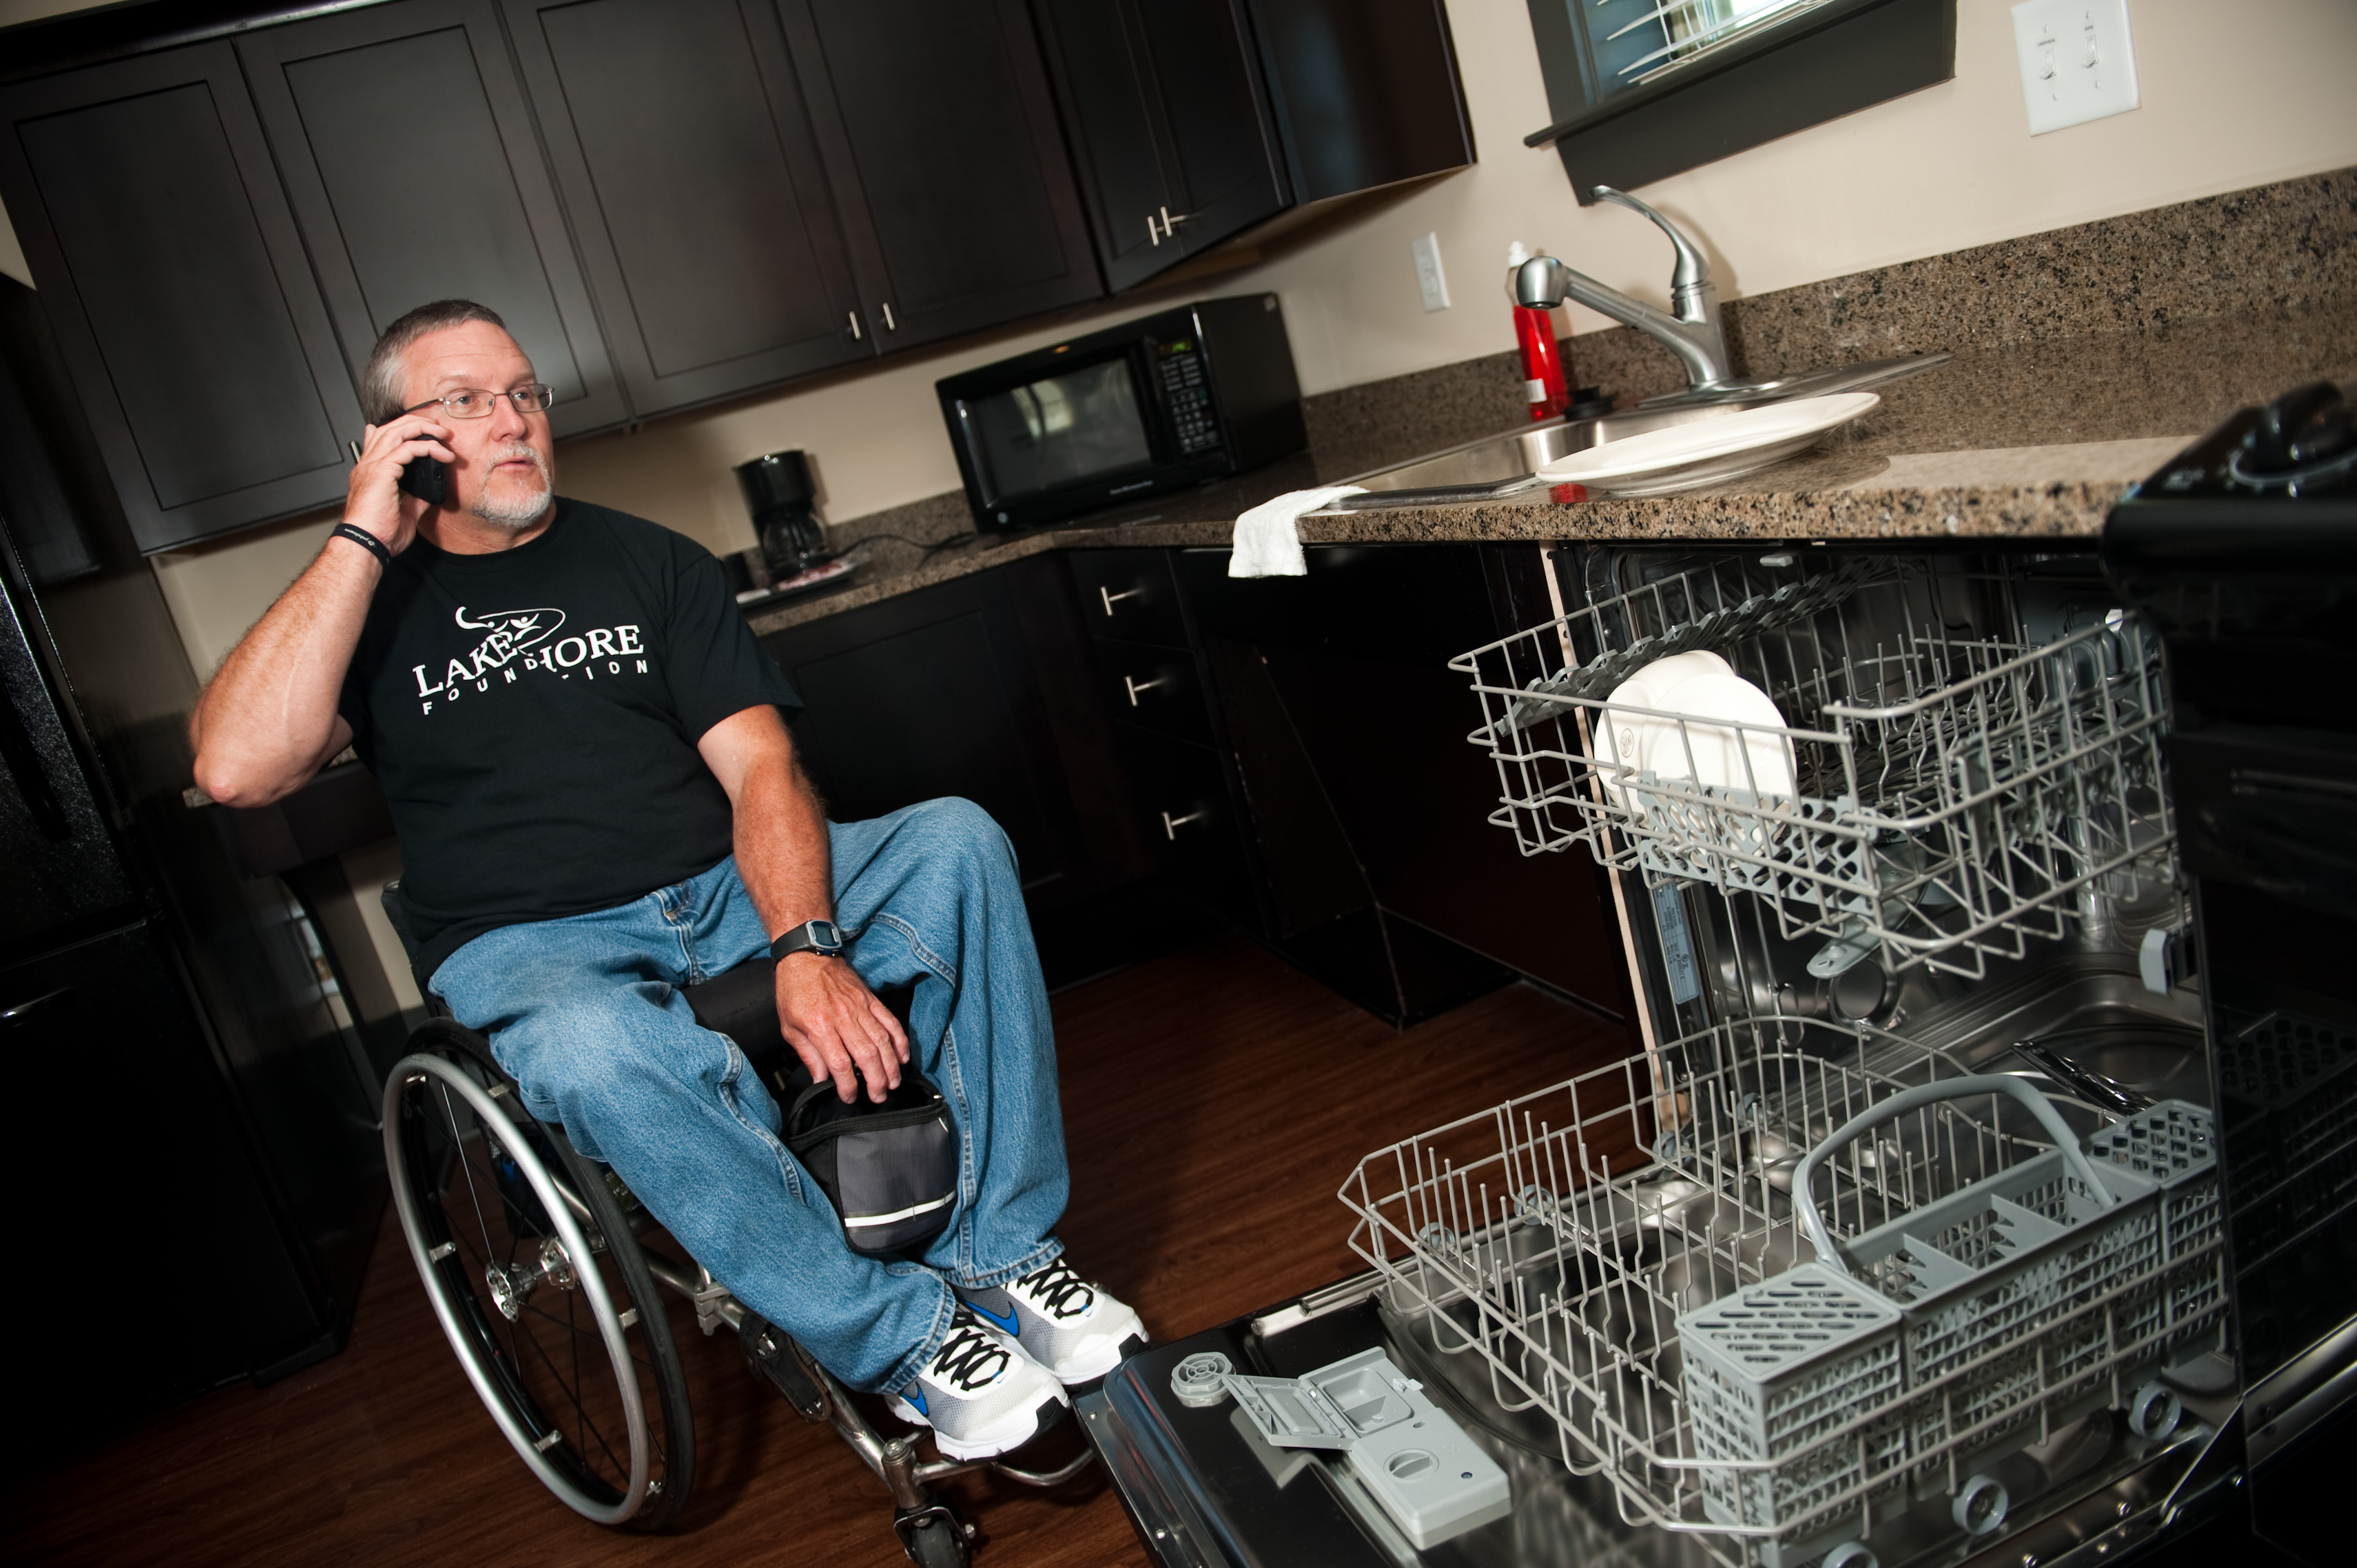 man in wheelchair speaks on cell phone while in kitchen